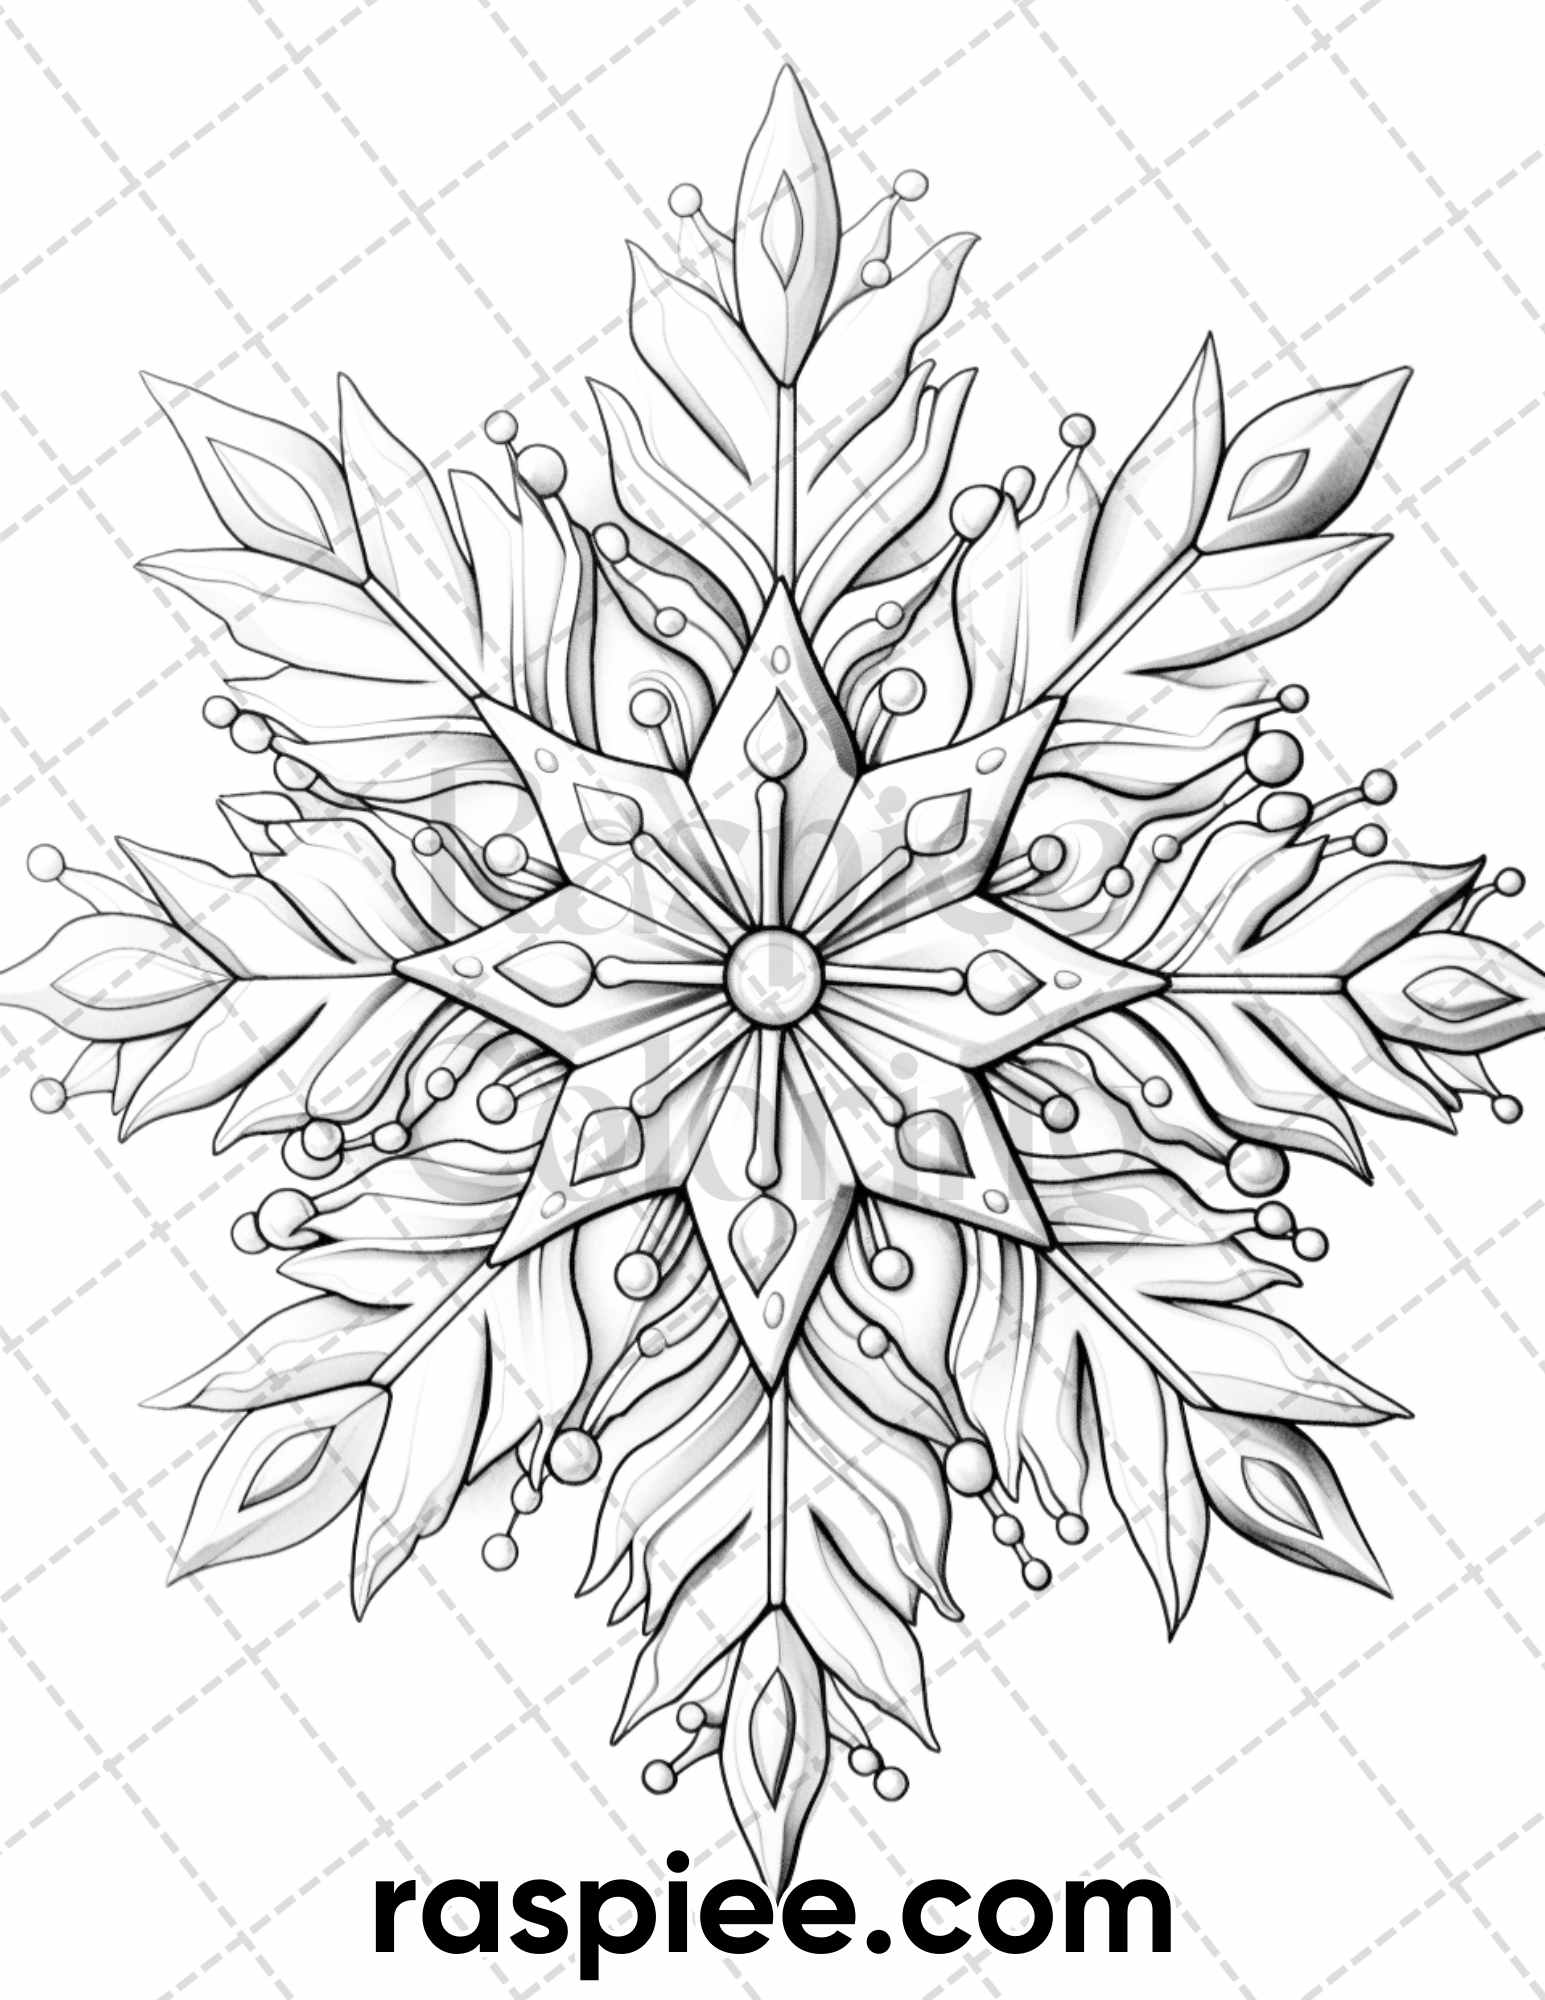 Christmas snowflake grayscale coloring pages for adults printable â coloring